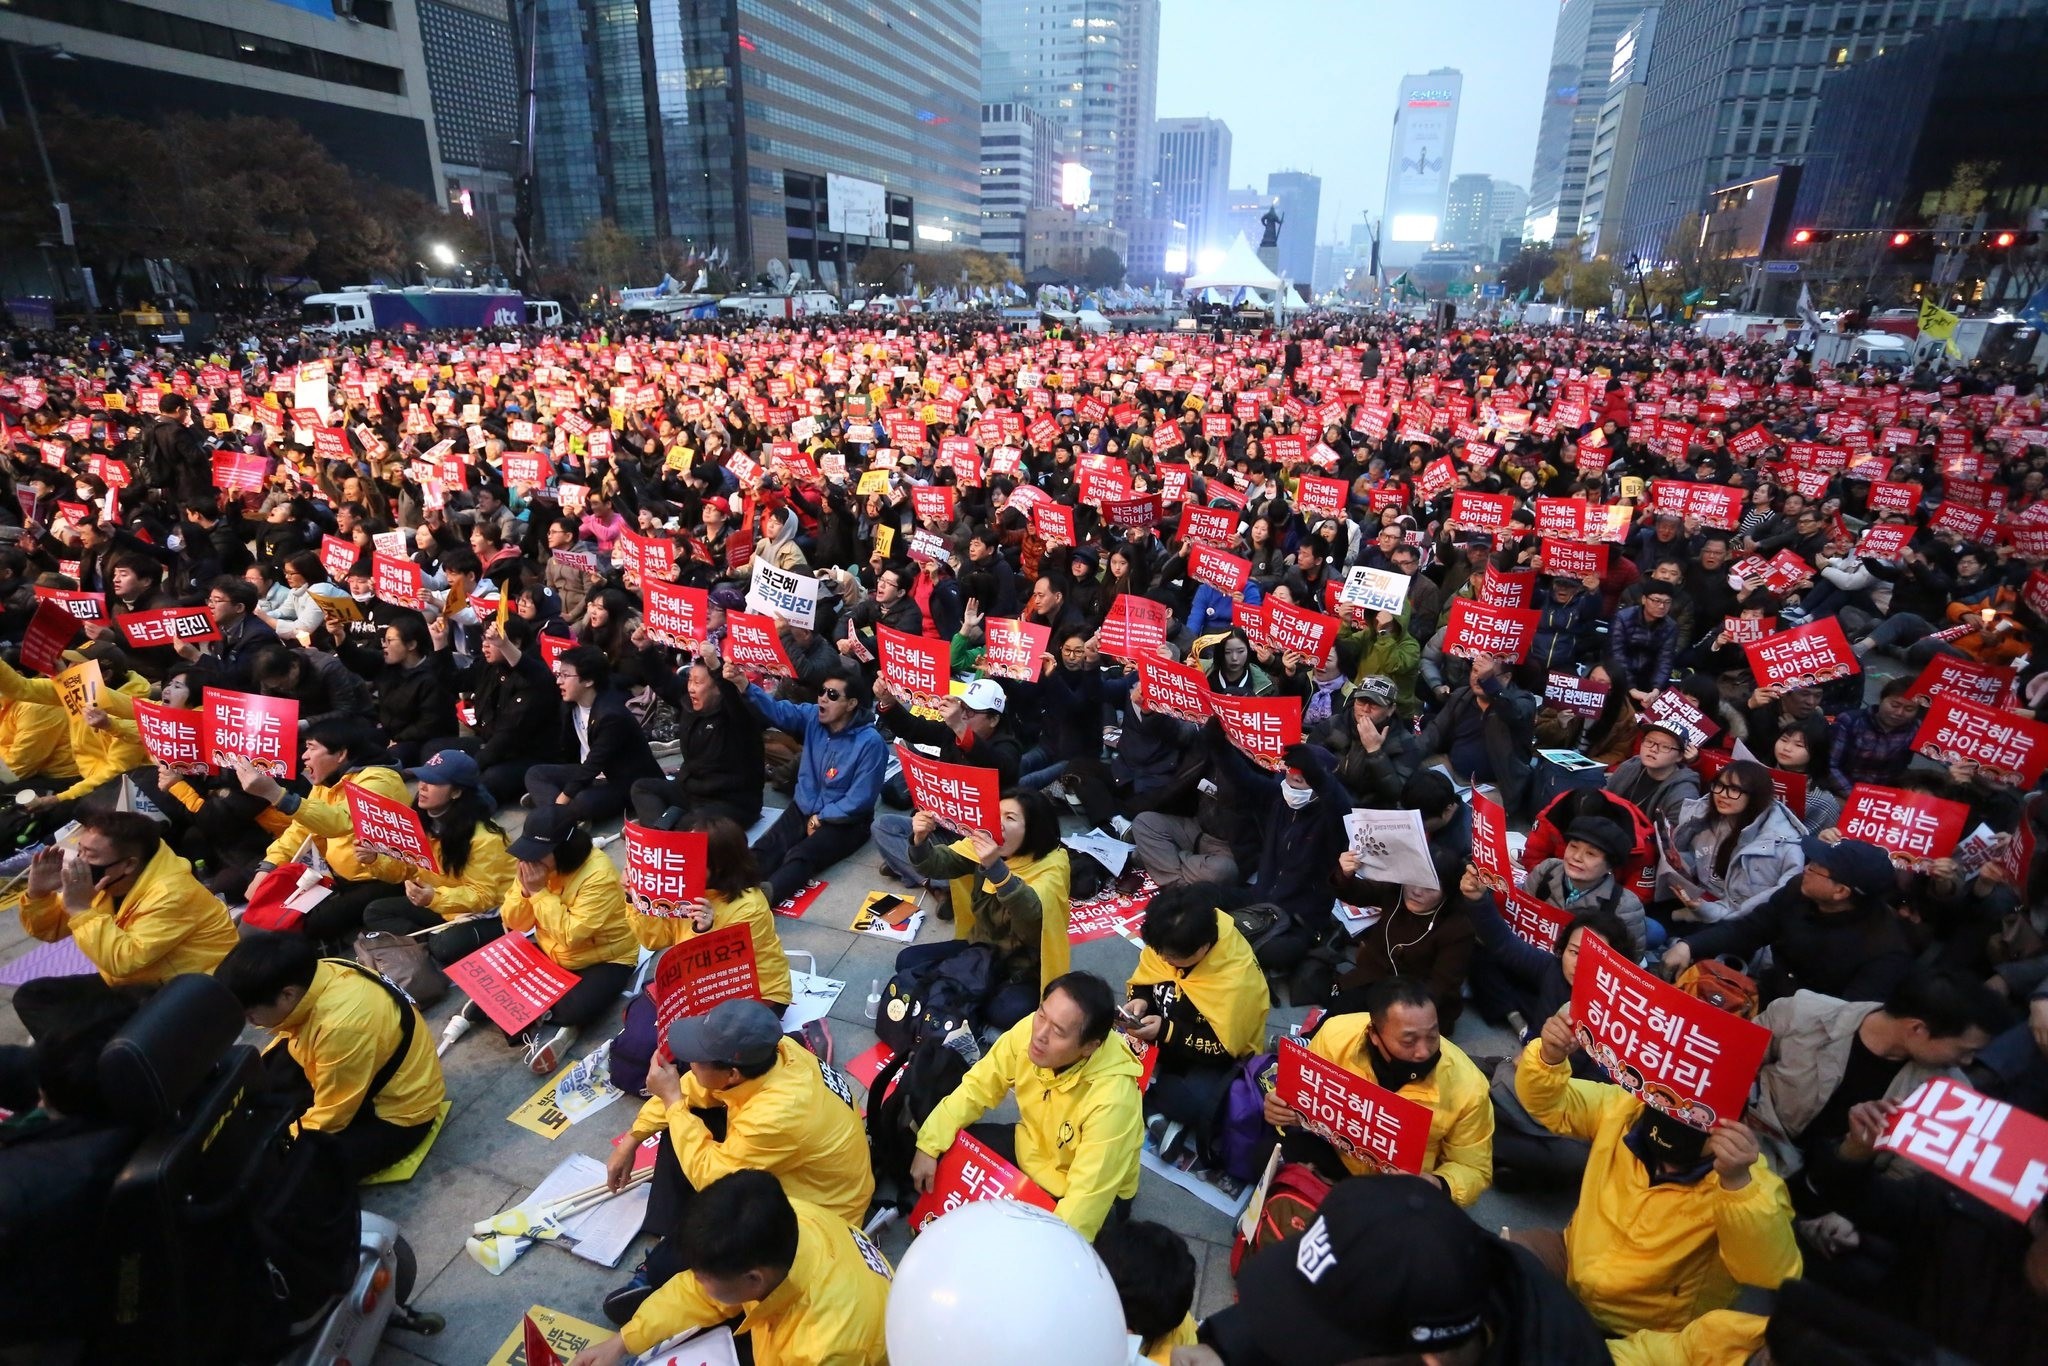 South Koreans shout slogans as they carry placards reading 'Park Geun-Hye Out' during a rally against South Korean President Park Geun-Hye on a main street in Seoul, 19 Nov. 2016. (EPA Photo)